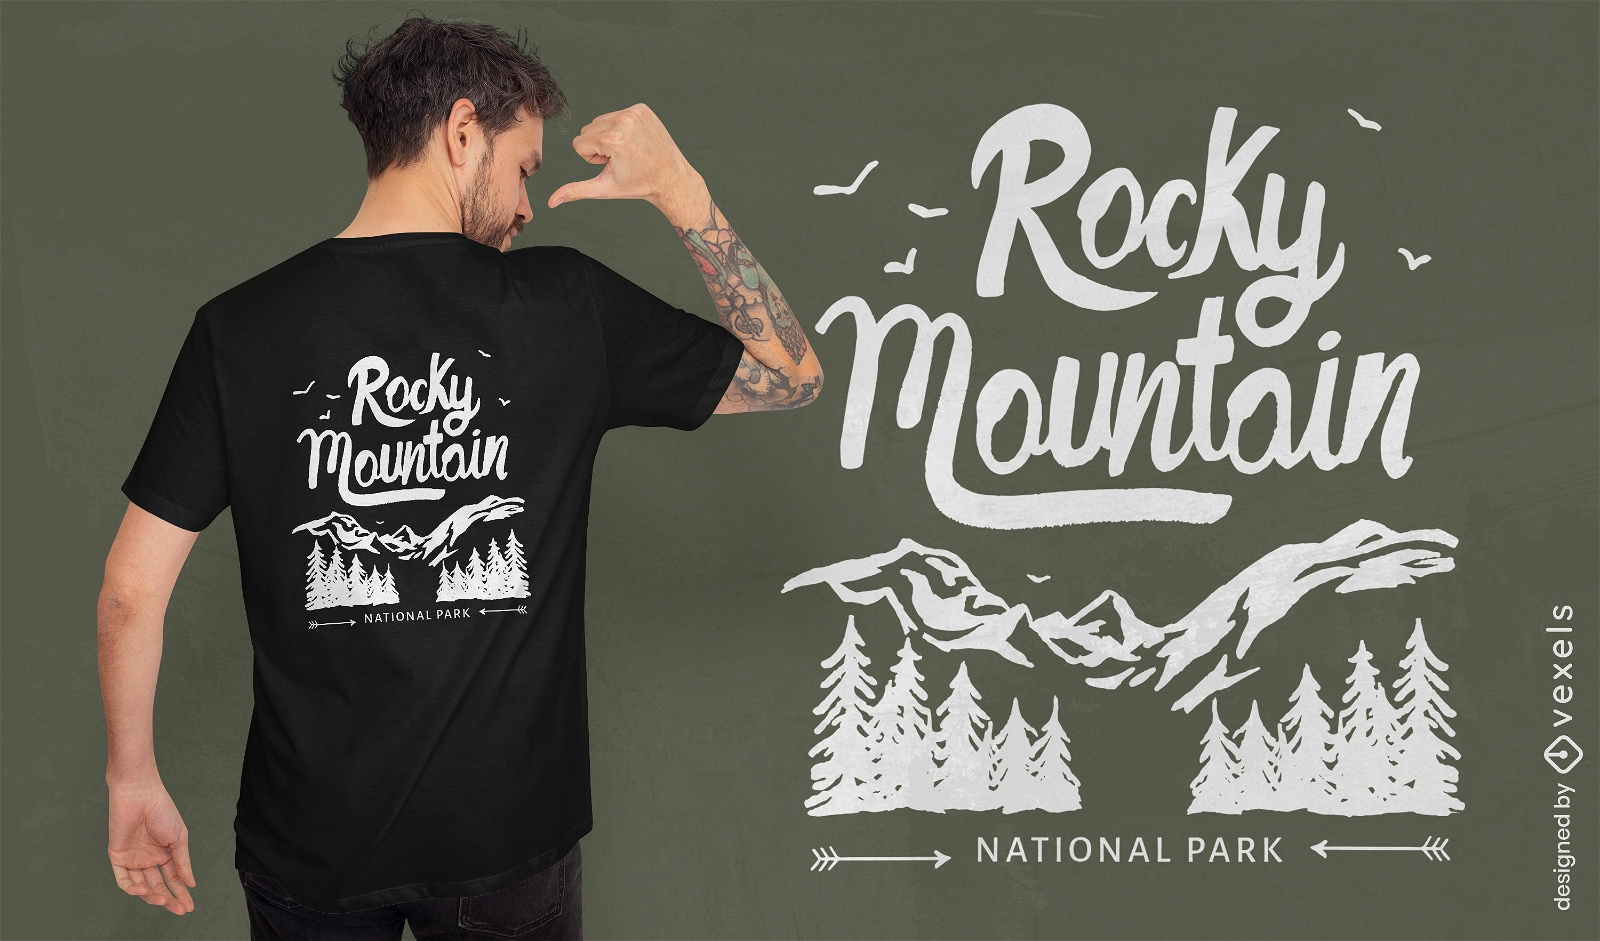 Mountains and pine trees t-shirt design